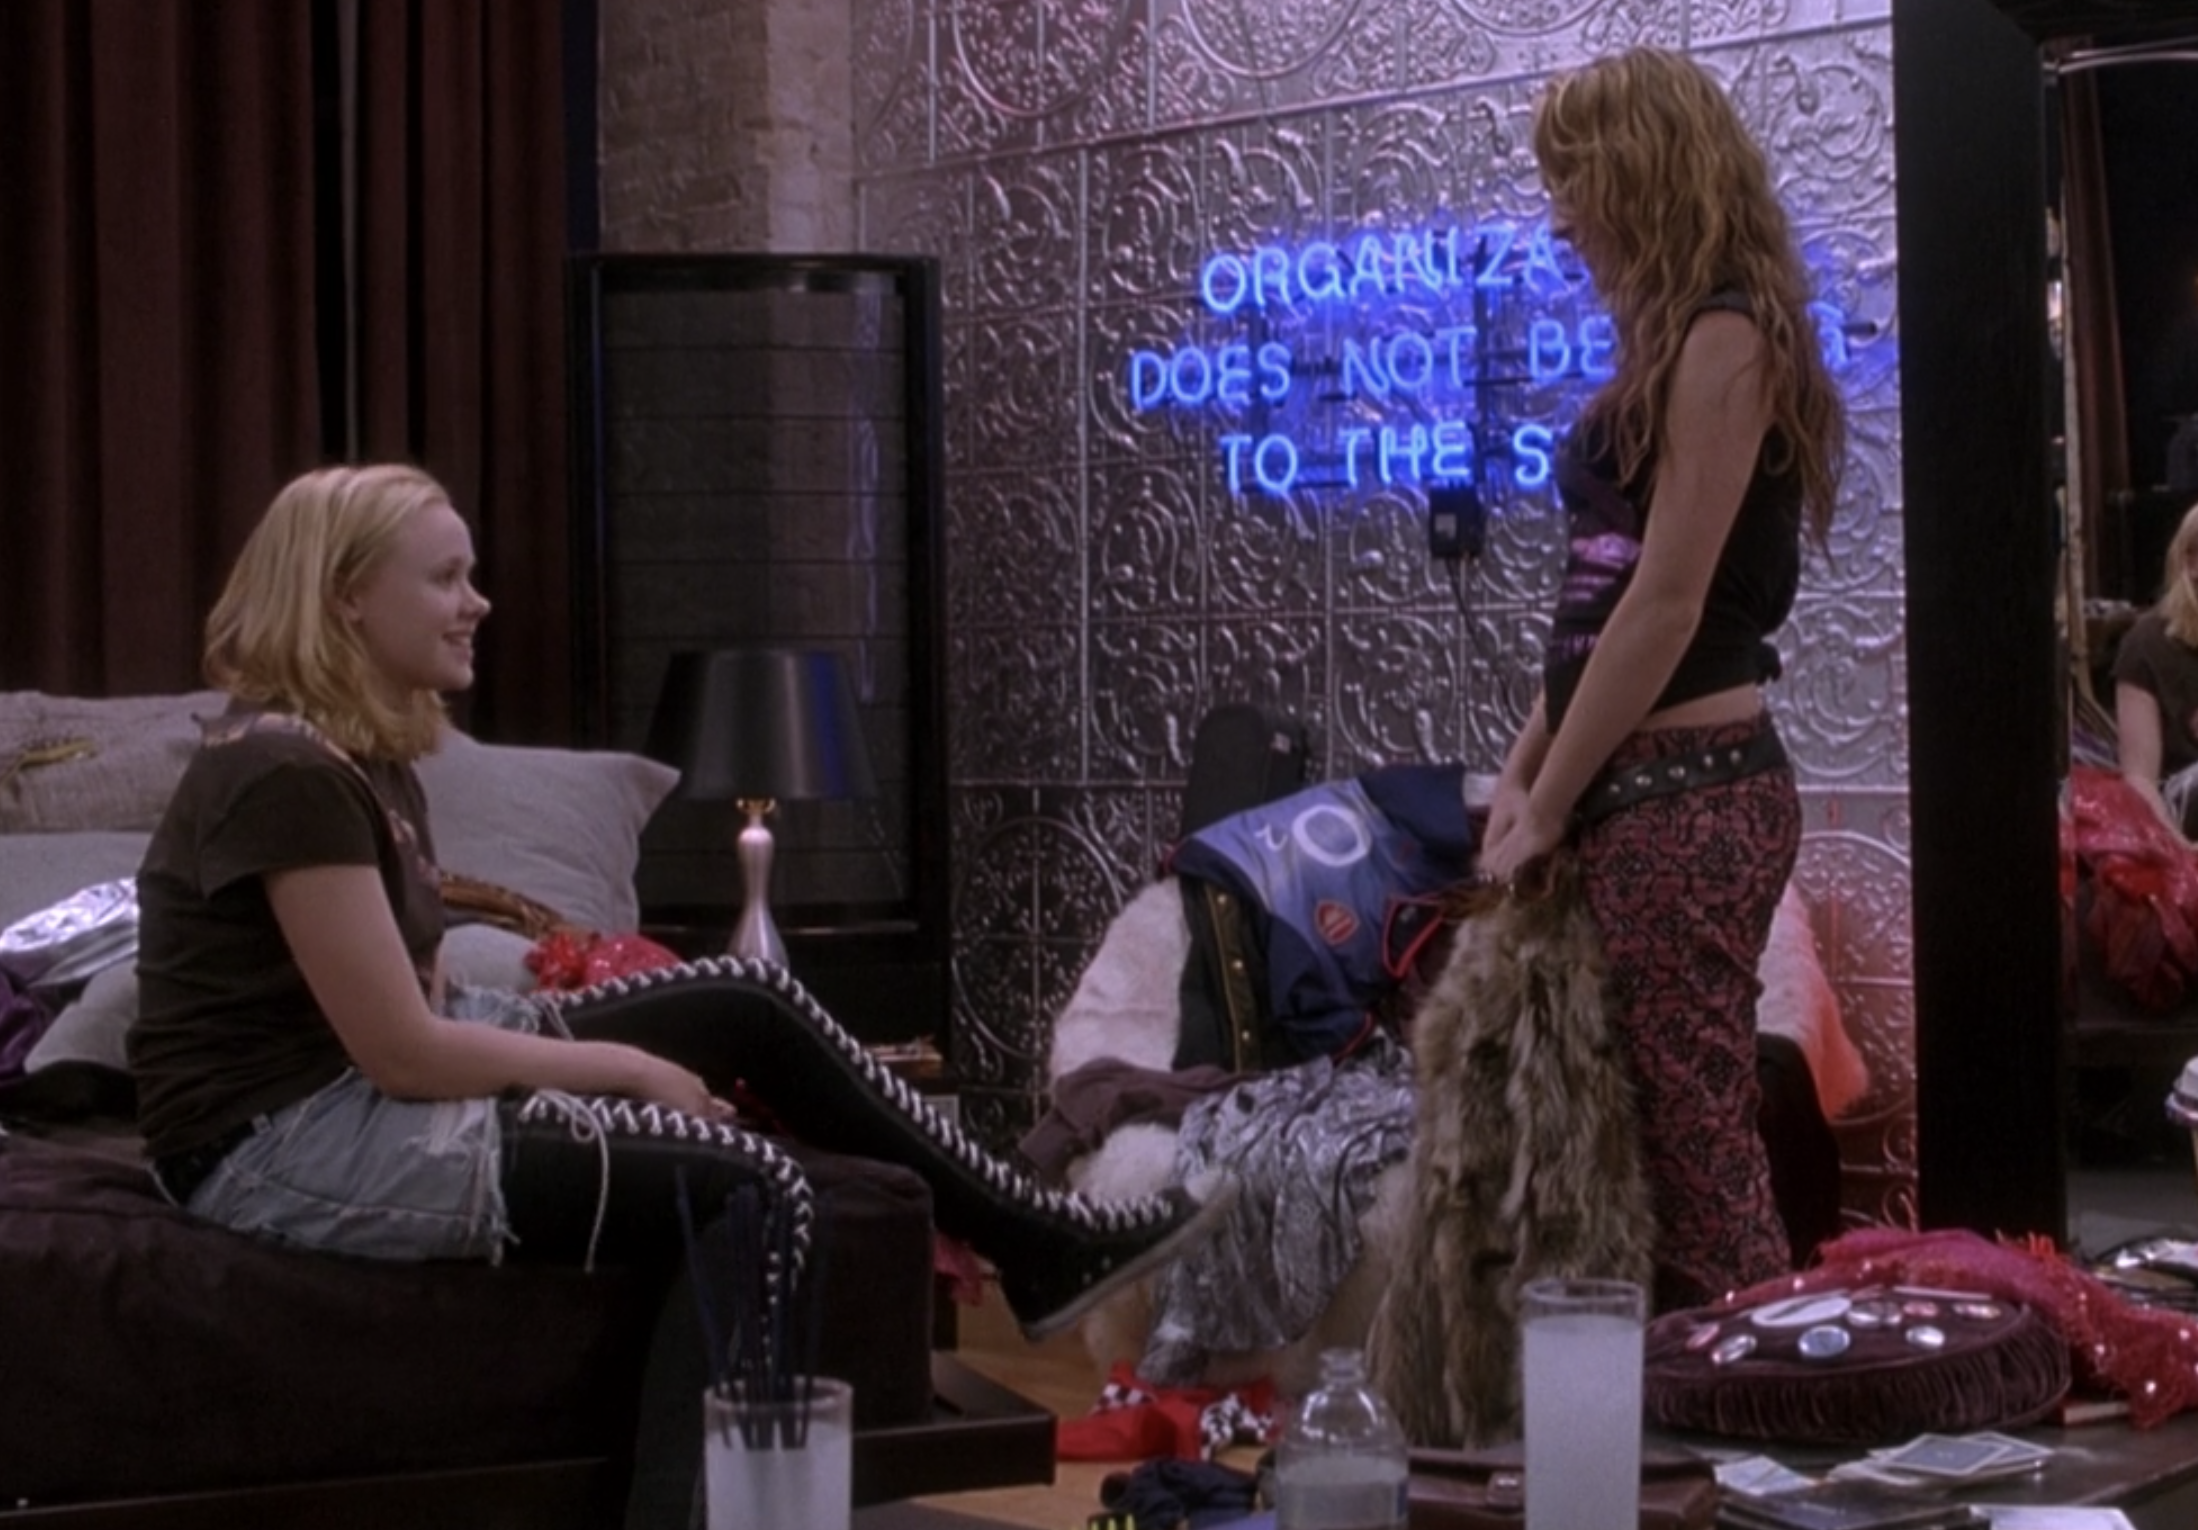 Alison Pill wears thigh-high Converse sneakers as Ella and Lindsay Lohan wears low-rise patterned pants with a belt slung across them as Lola in &quot;Confessions of a Teenage Drama Queen&quot;